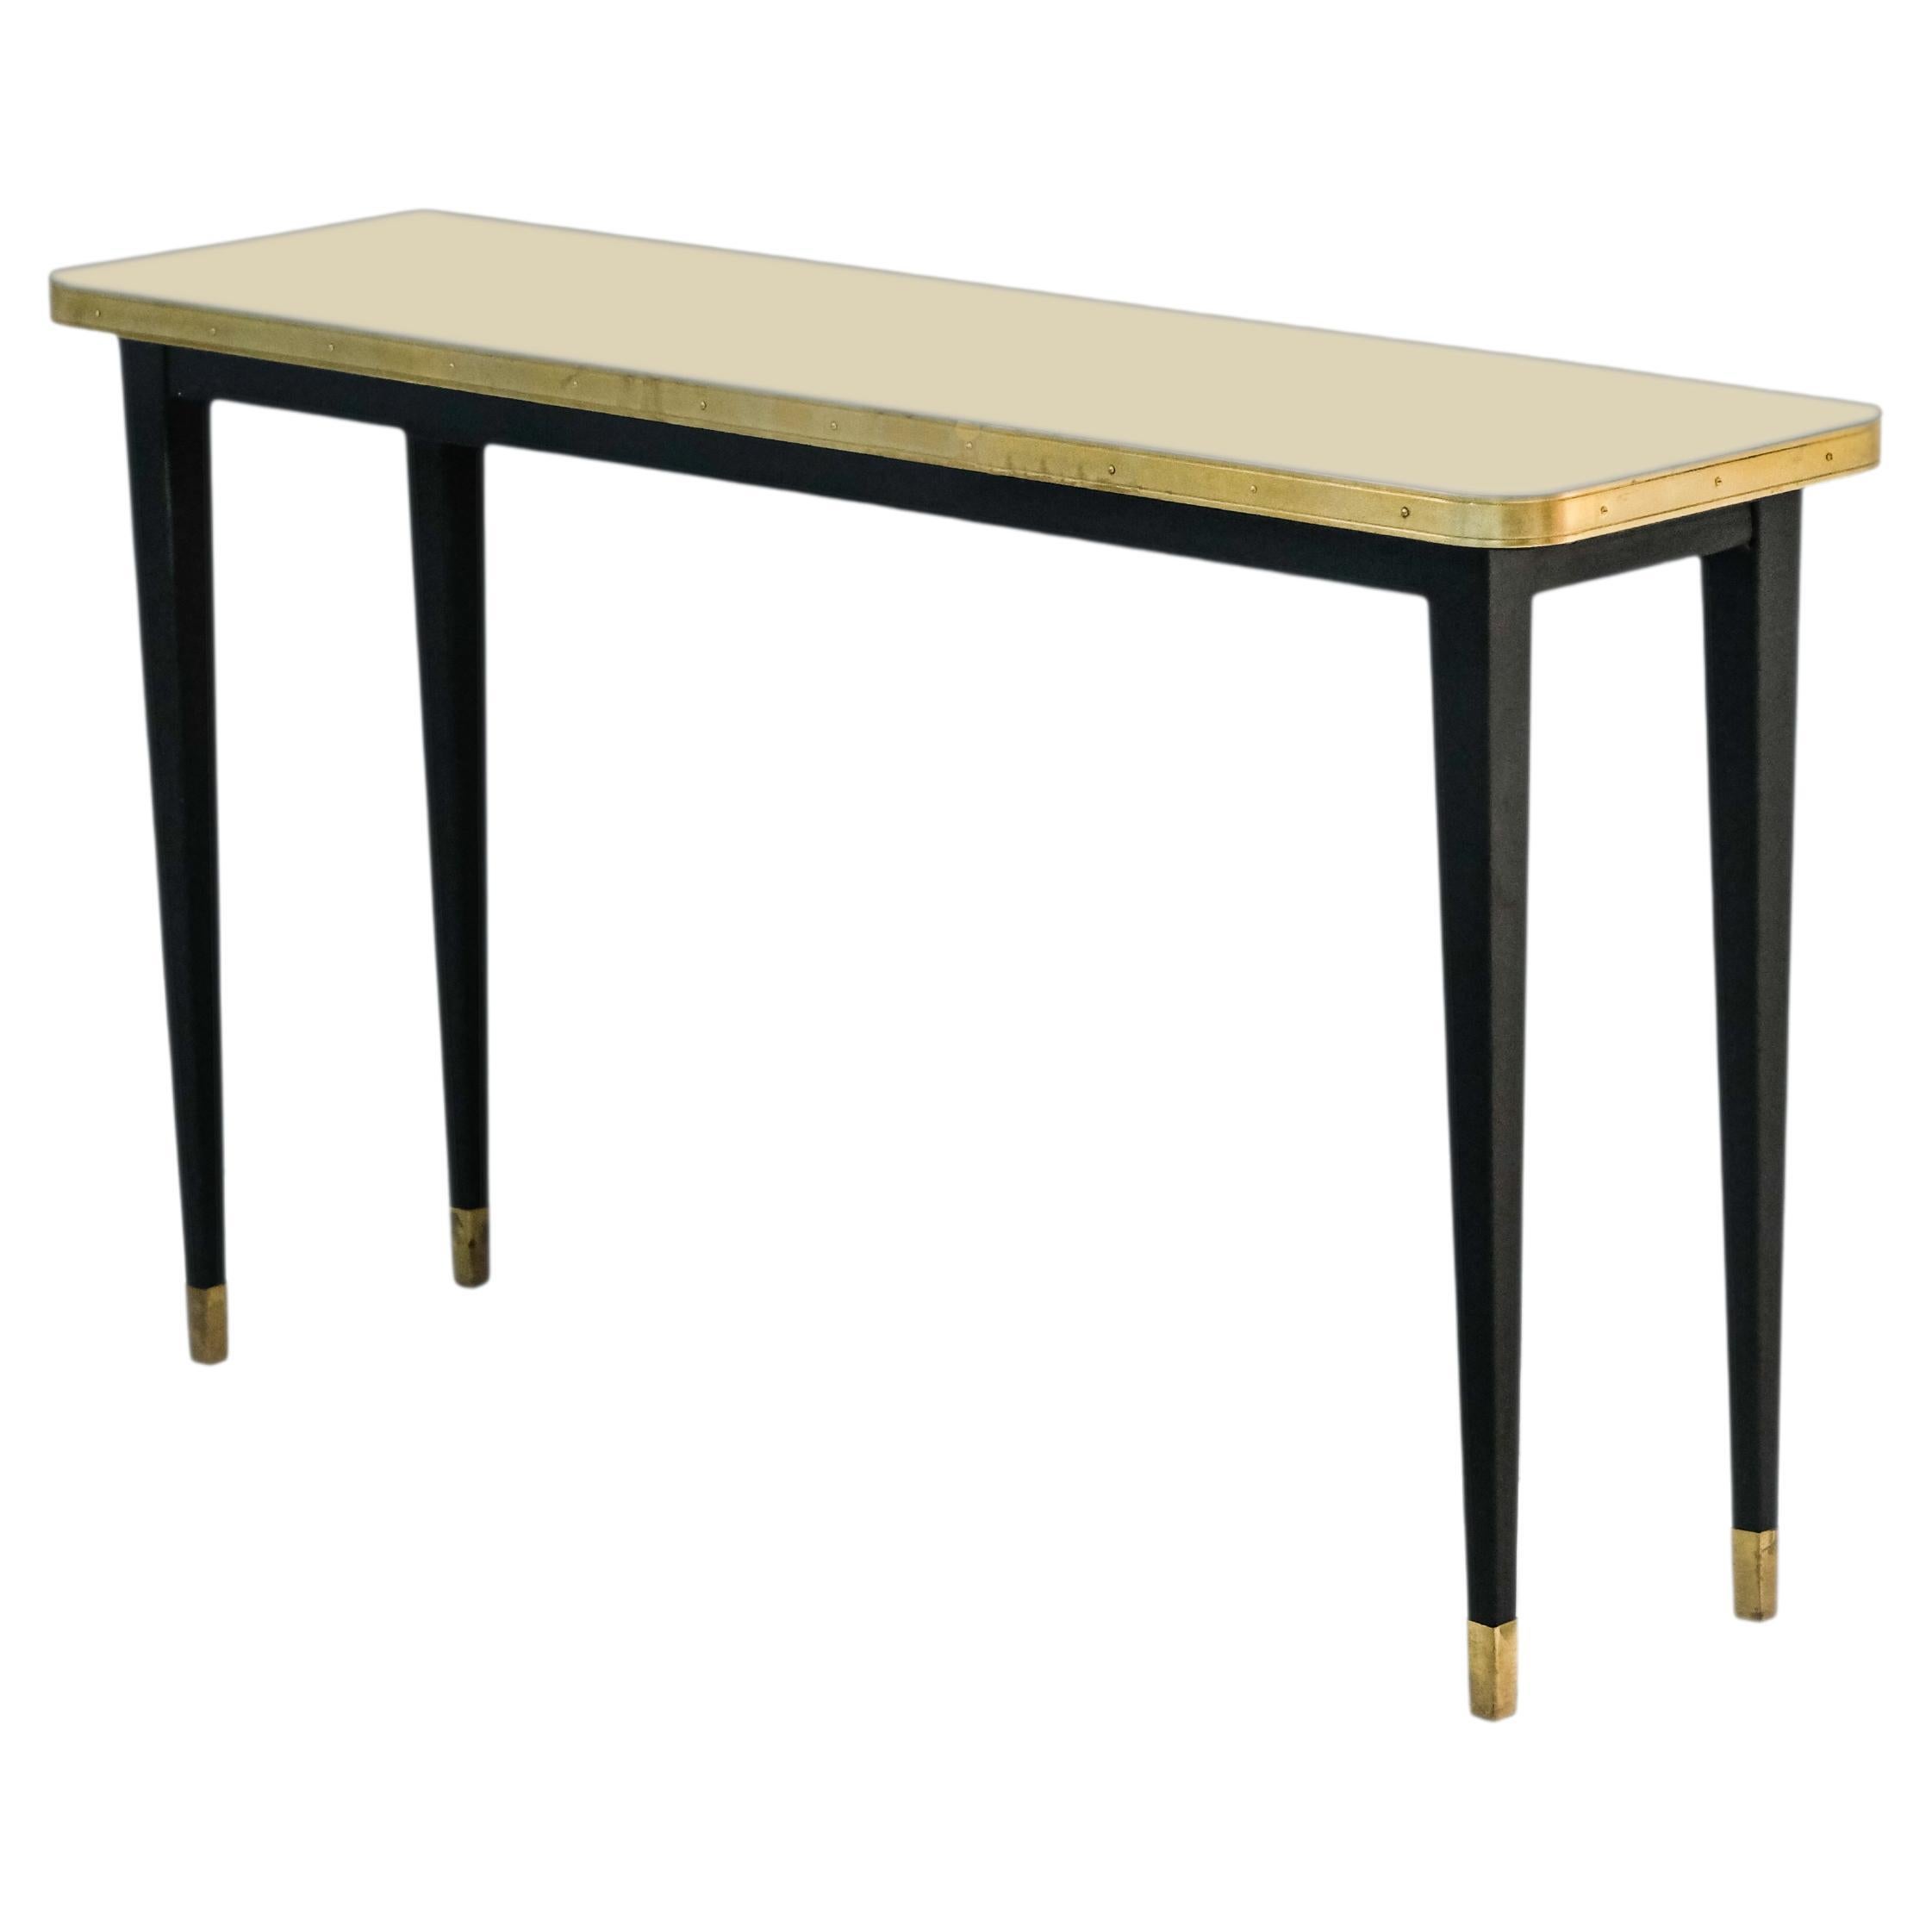 Julieta Collection. 

Console Table with High Gloss Top, Brass Tape Framed, Black Powder Coating Conical Legs with Brass End

Introducing the stunning console table with black powder-coated steel construction, boasting sleek conical legs with